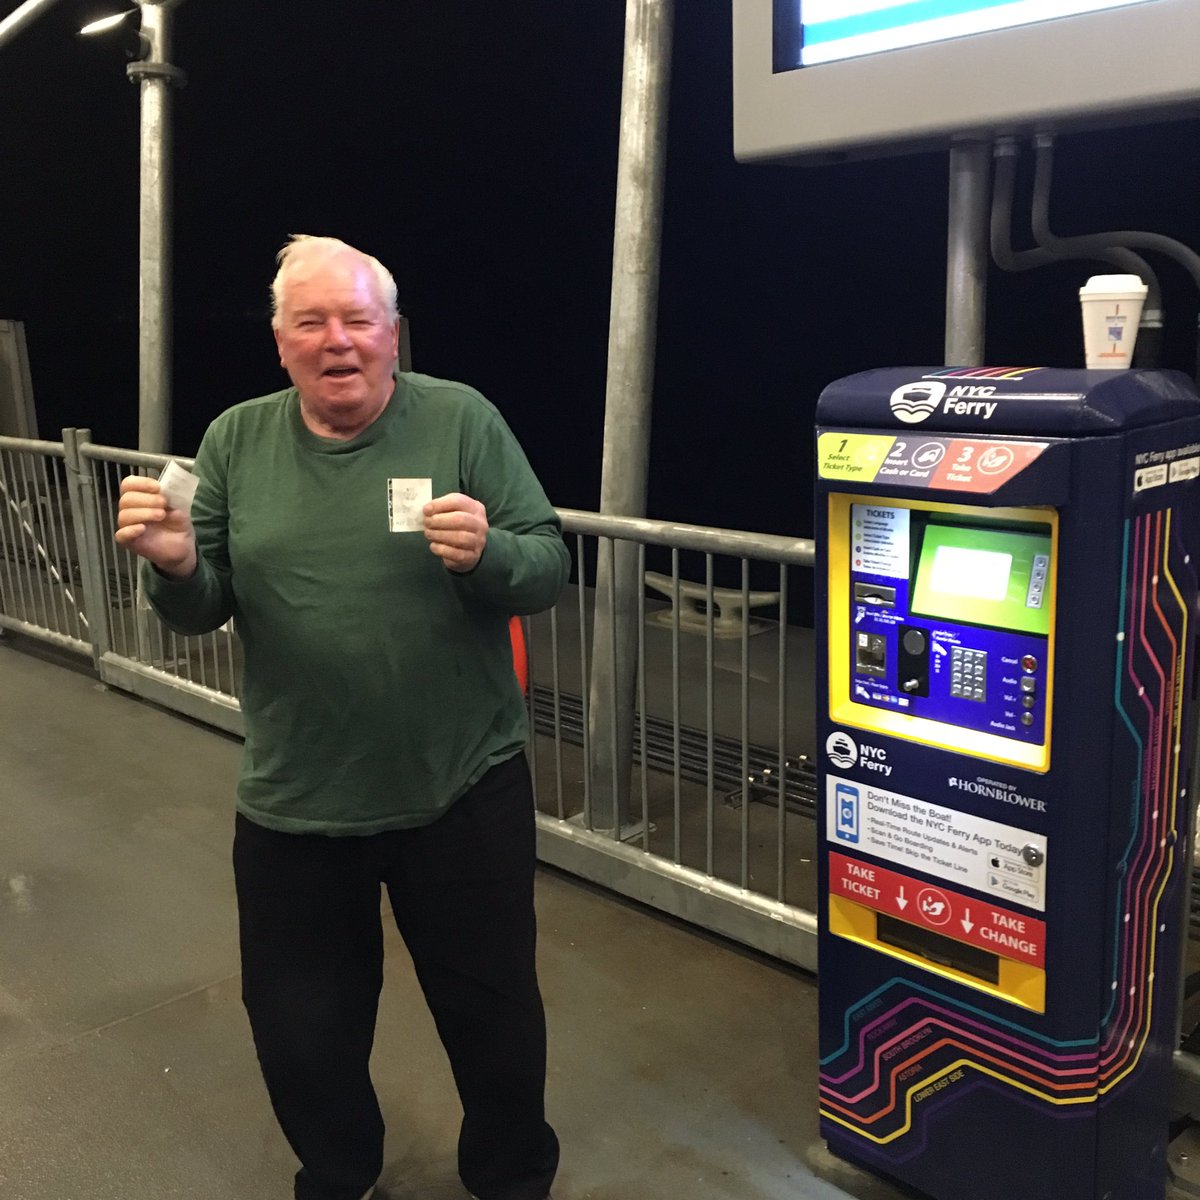 Jim McHugh, who at 4:45 am became the first Rockaway resident to buy a @NYCferry ticket! @NYCEDC @NYCMayorsOffice #readytoride